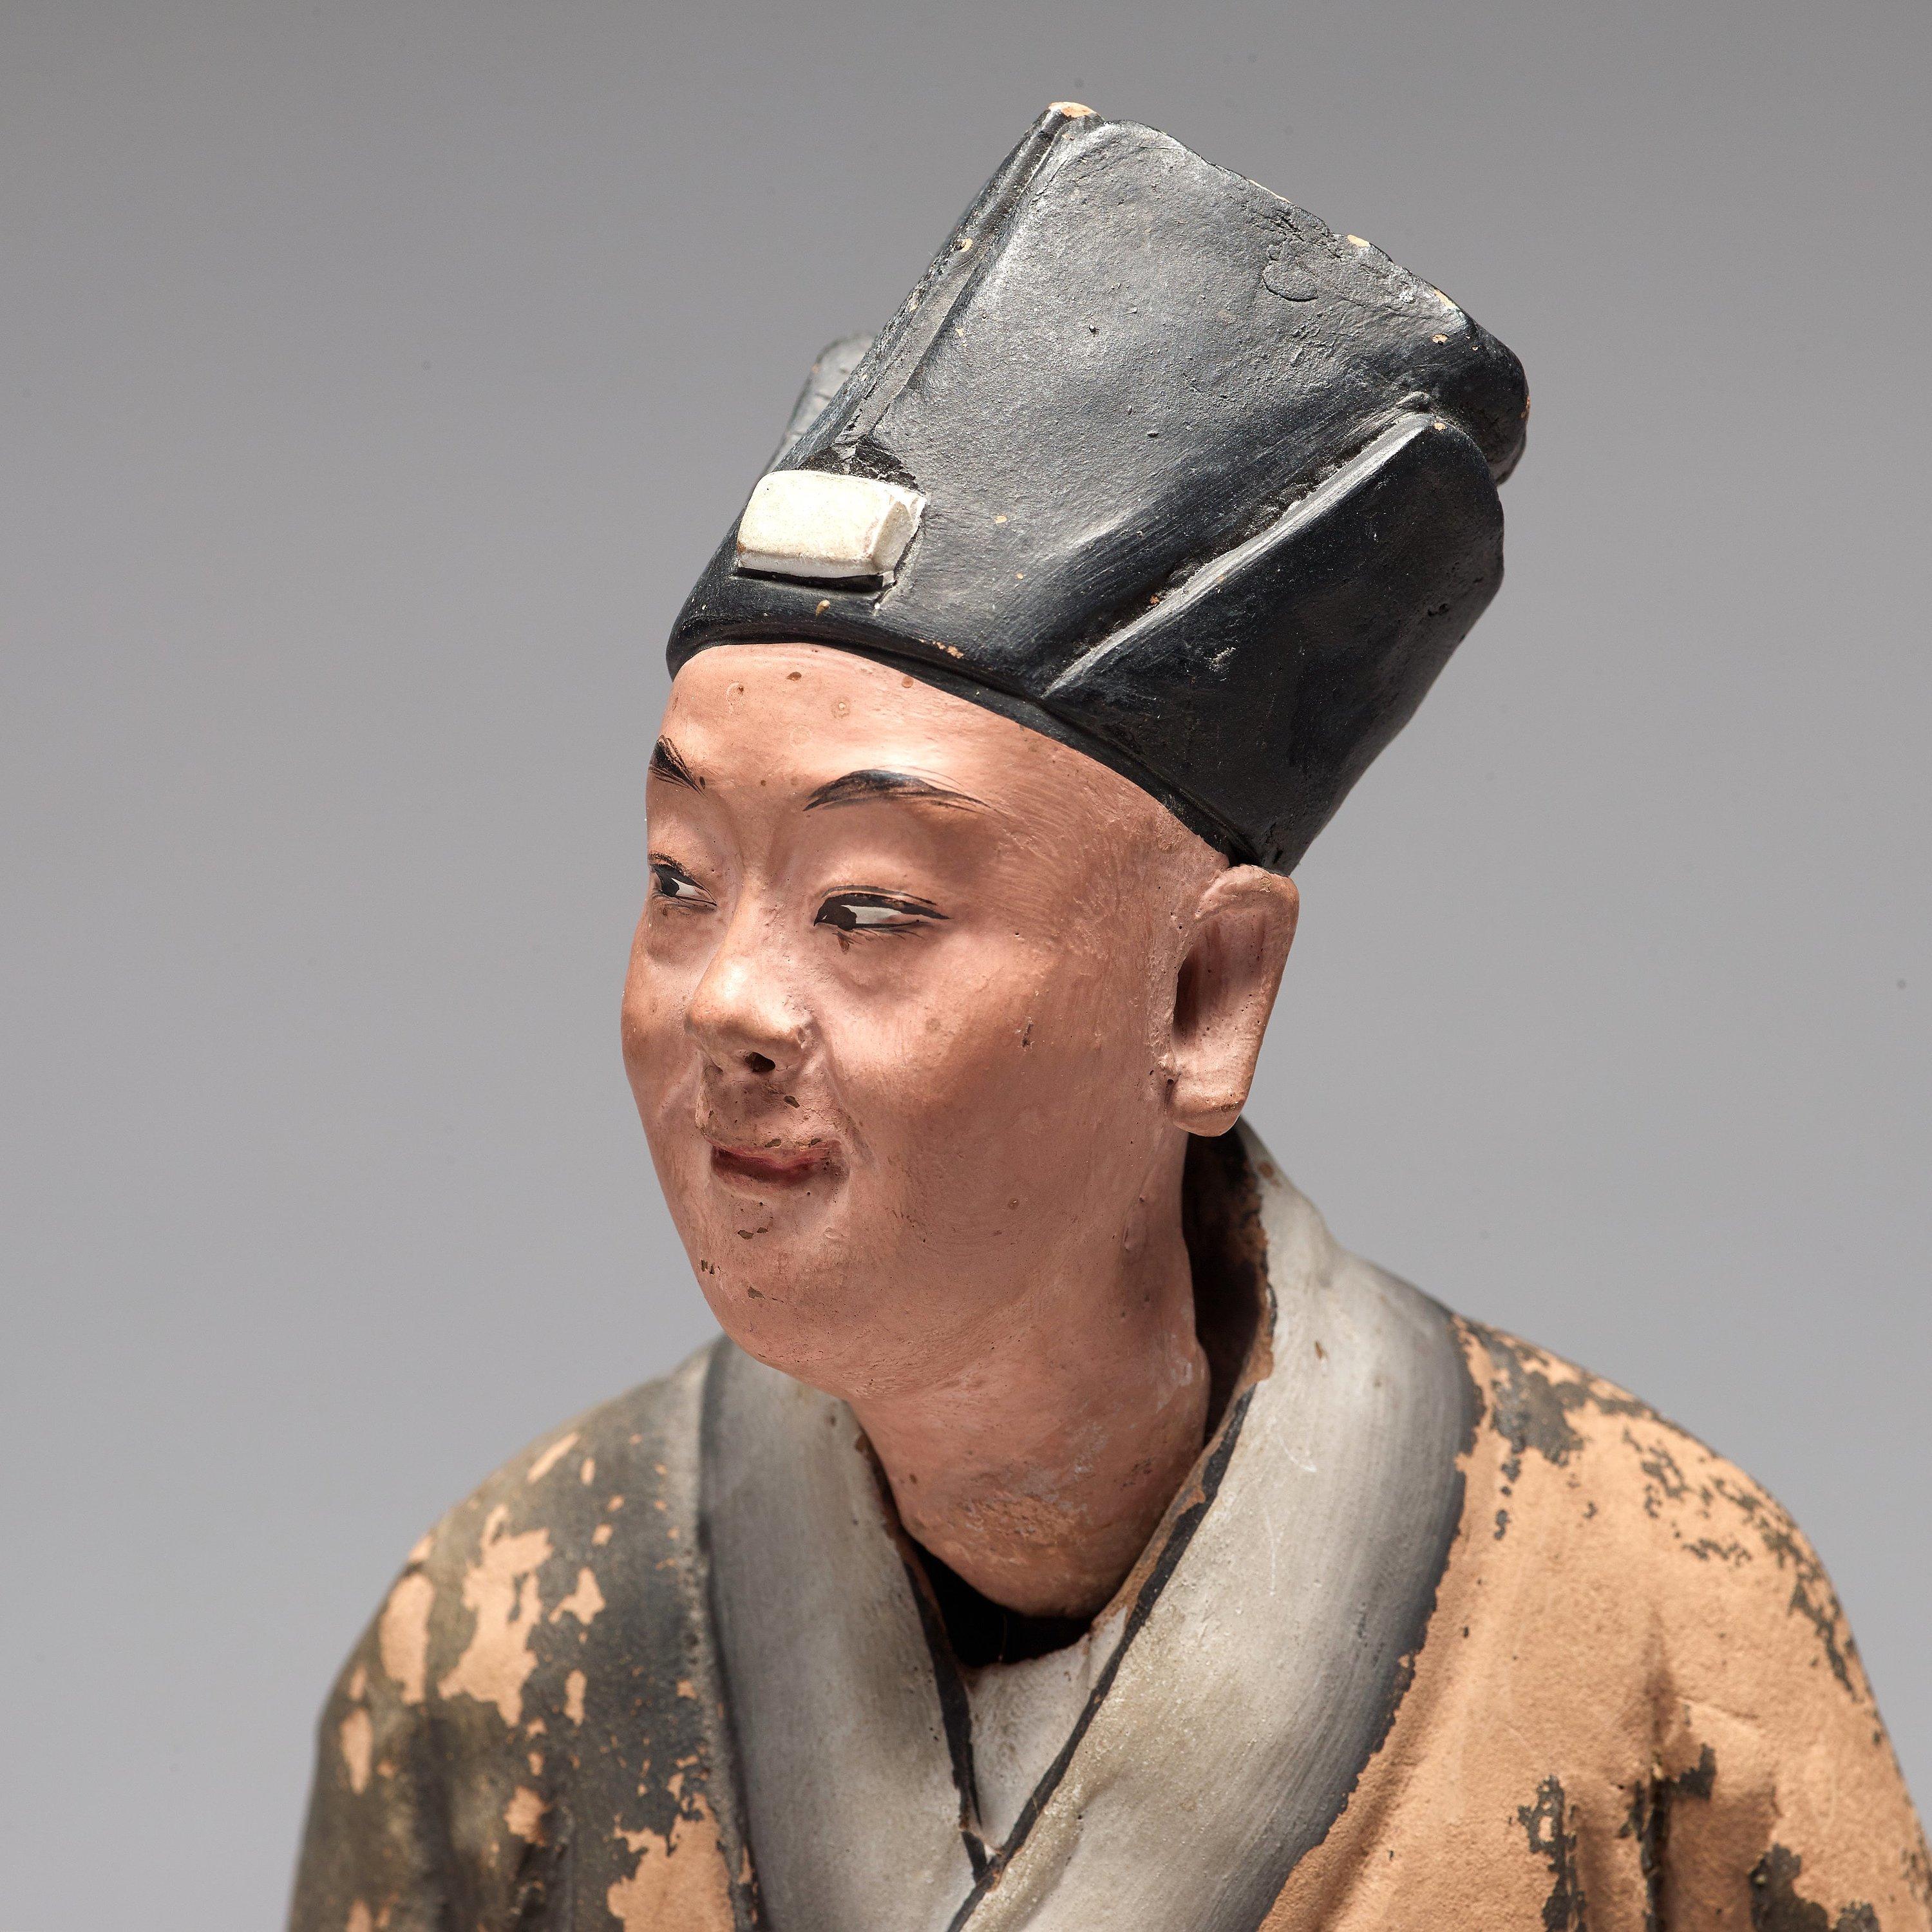 Chinoiserie Chinese Sculptured and Painted Clay Figure of a Man Holding a Lingzhi Mushroom